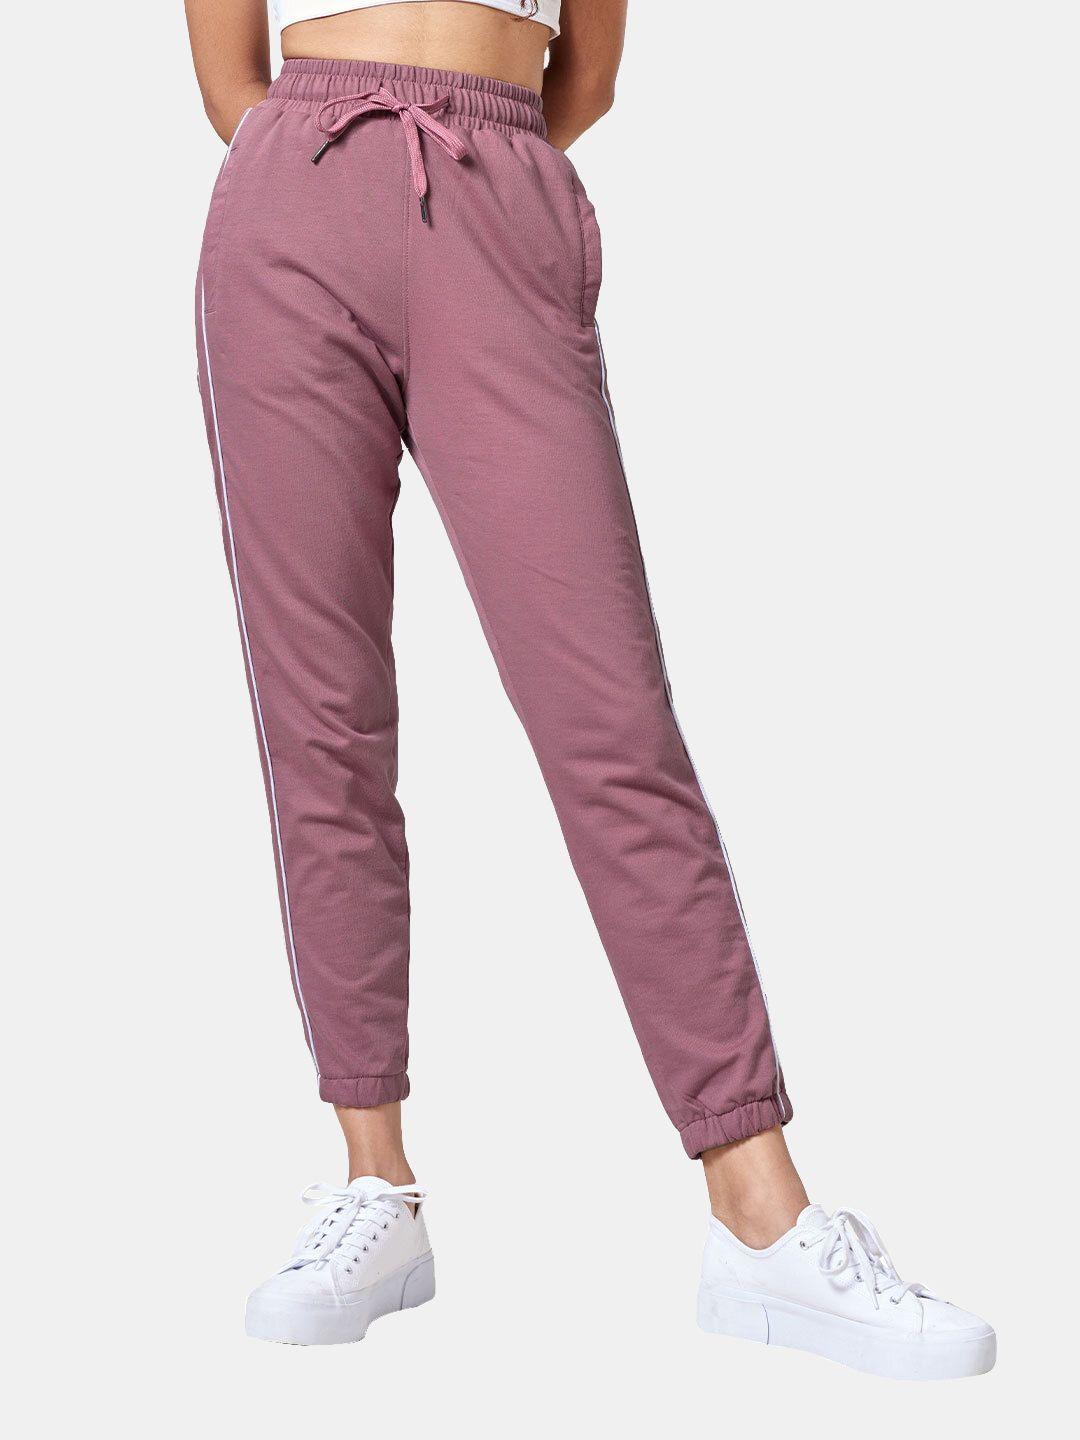 the souled store women pink solid joggers